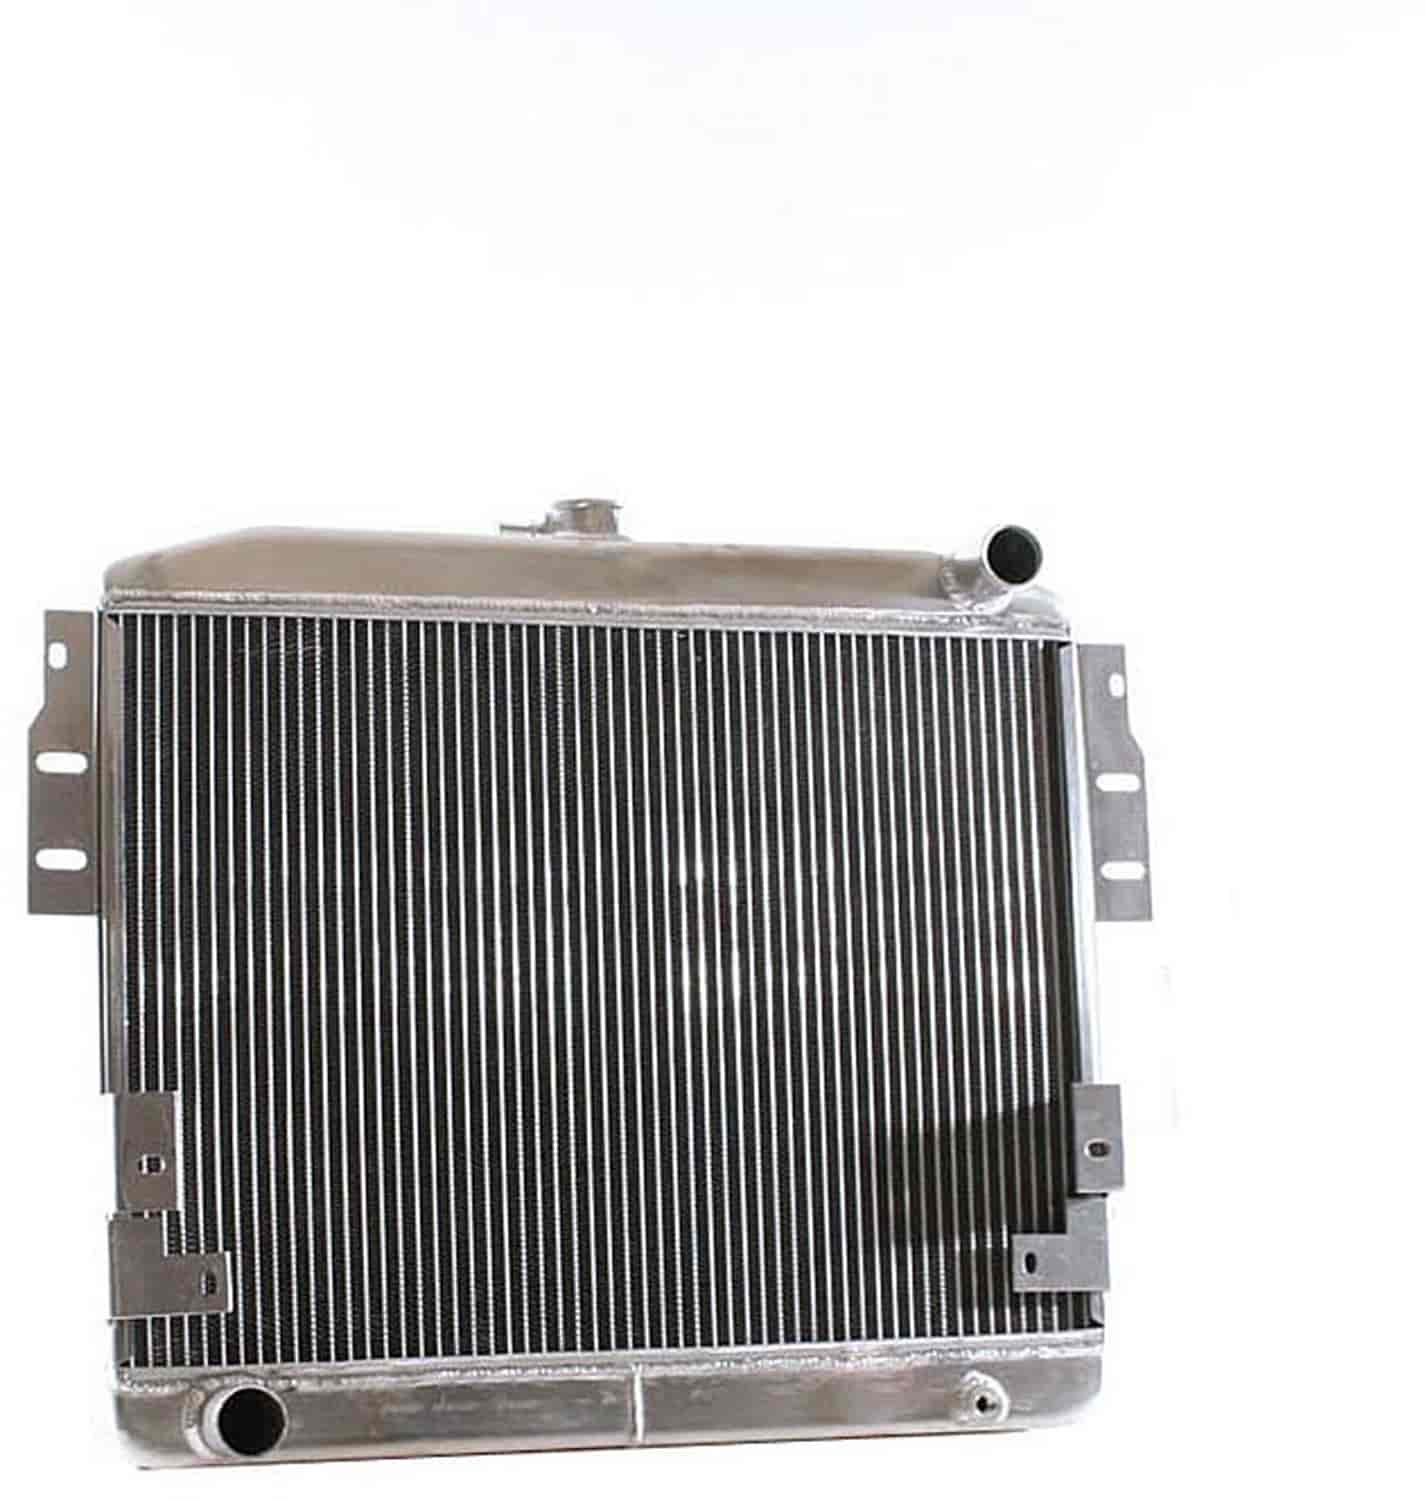 ExactFit Radiator for 1976-1978 Ford Mustang II